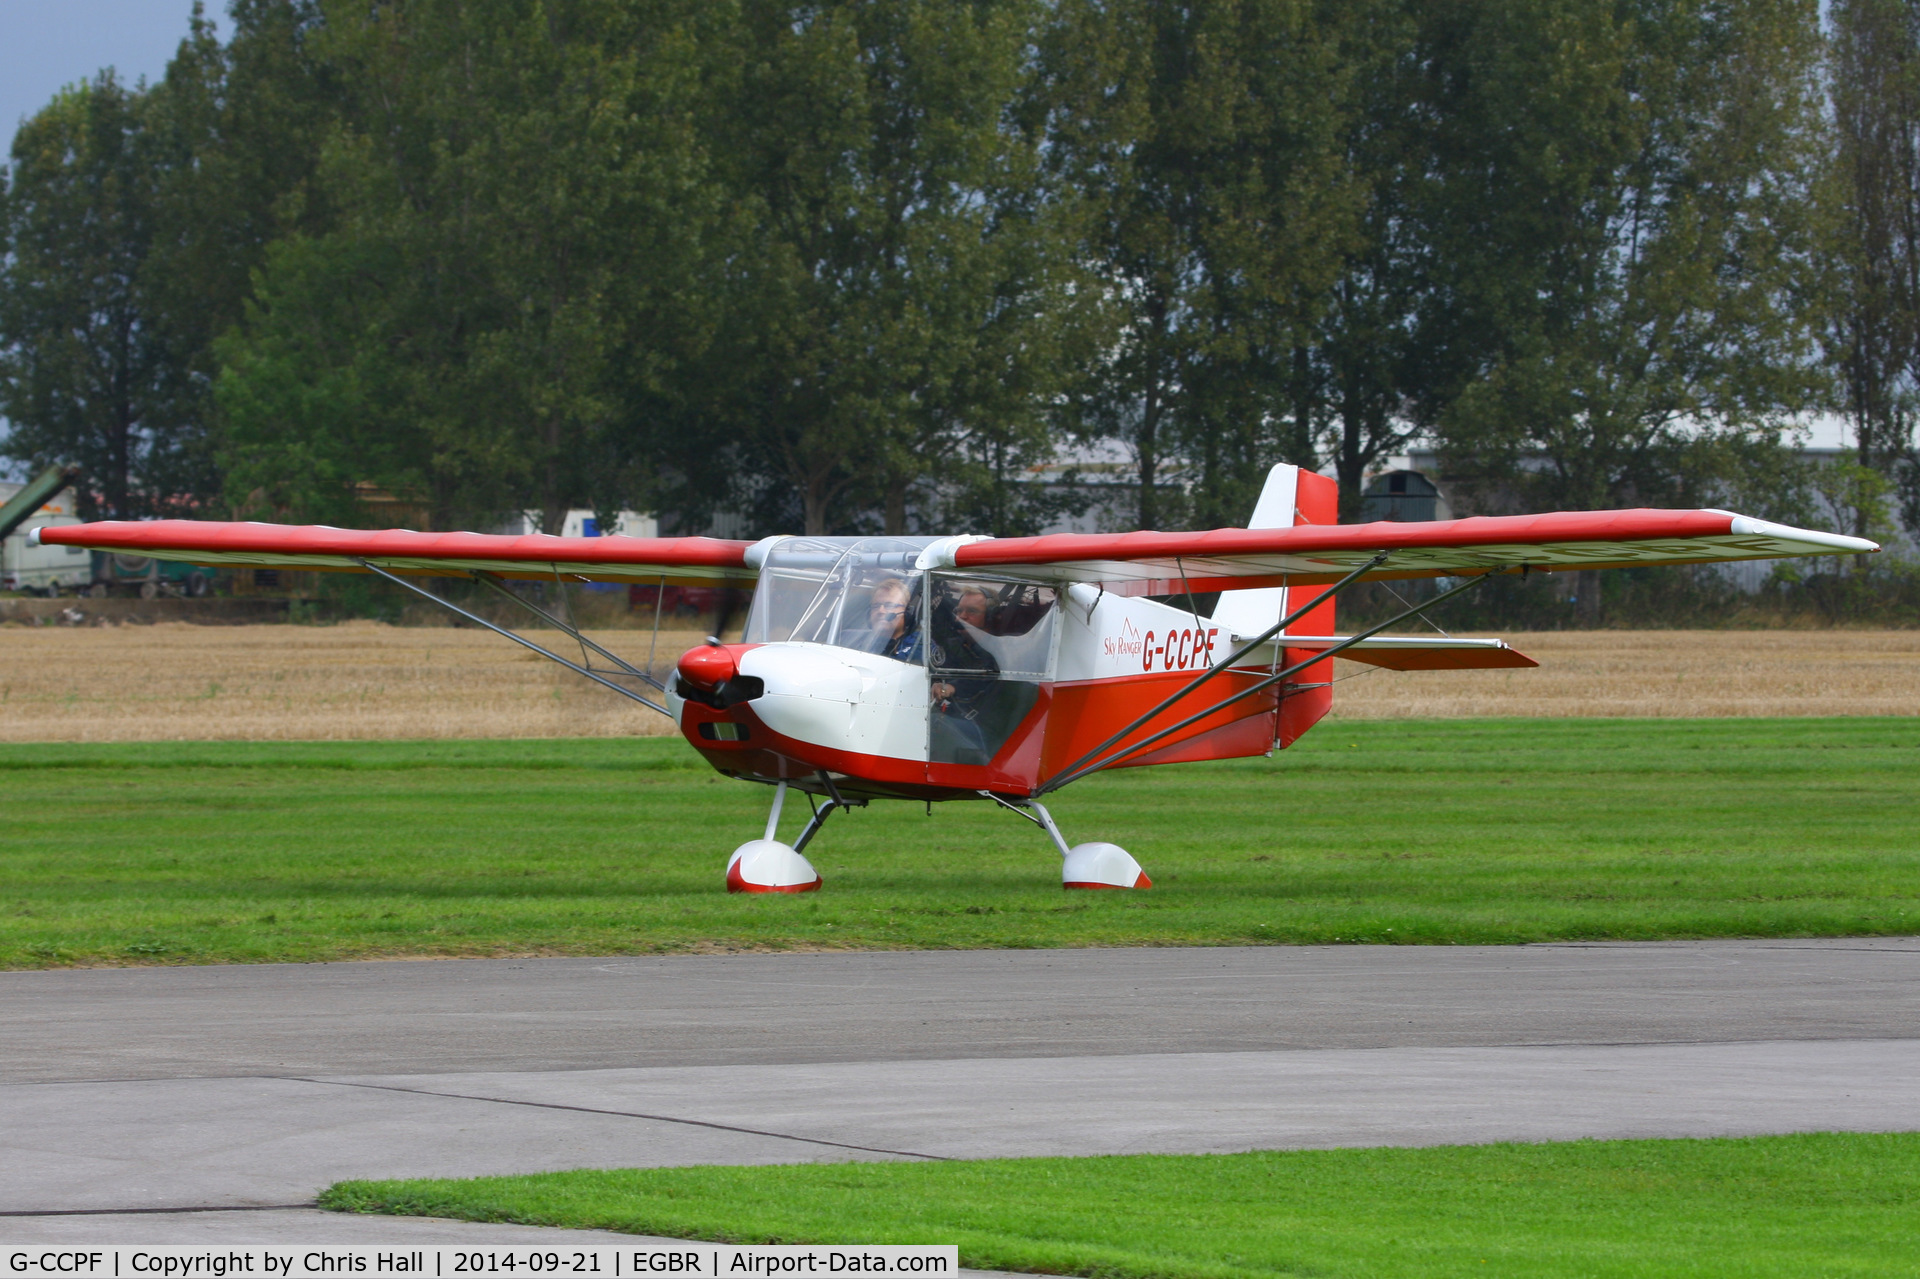 G-CCPF, 2004 Best Off Skyranger 912(2) C/N BMAA/HB/340, at Breighton's Heli Fly-in, 2014